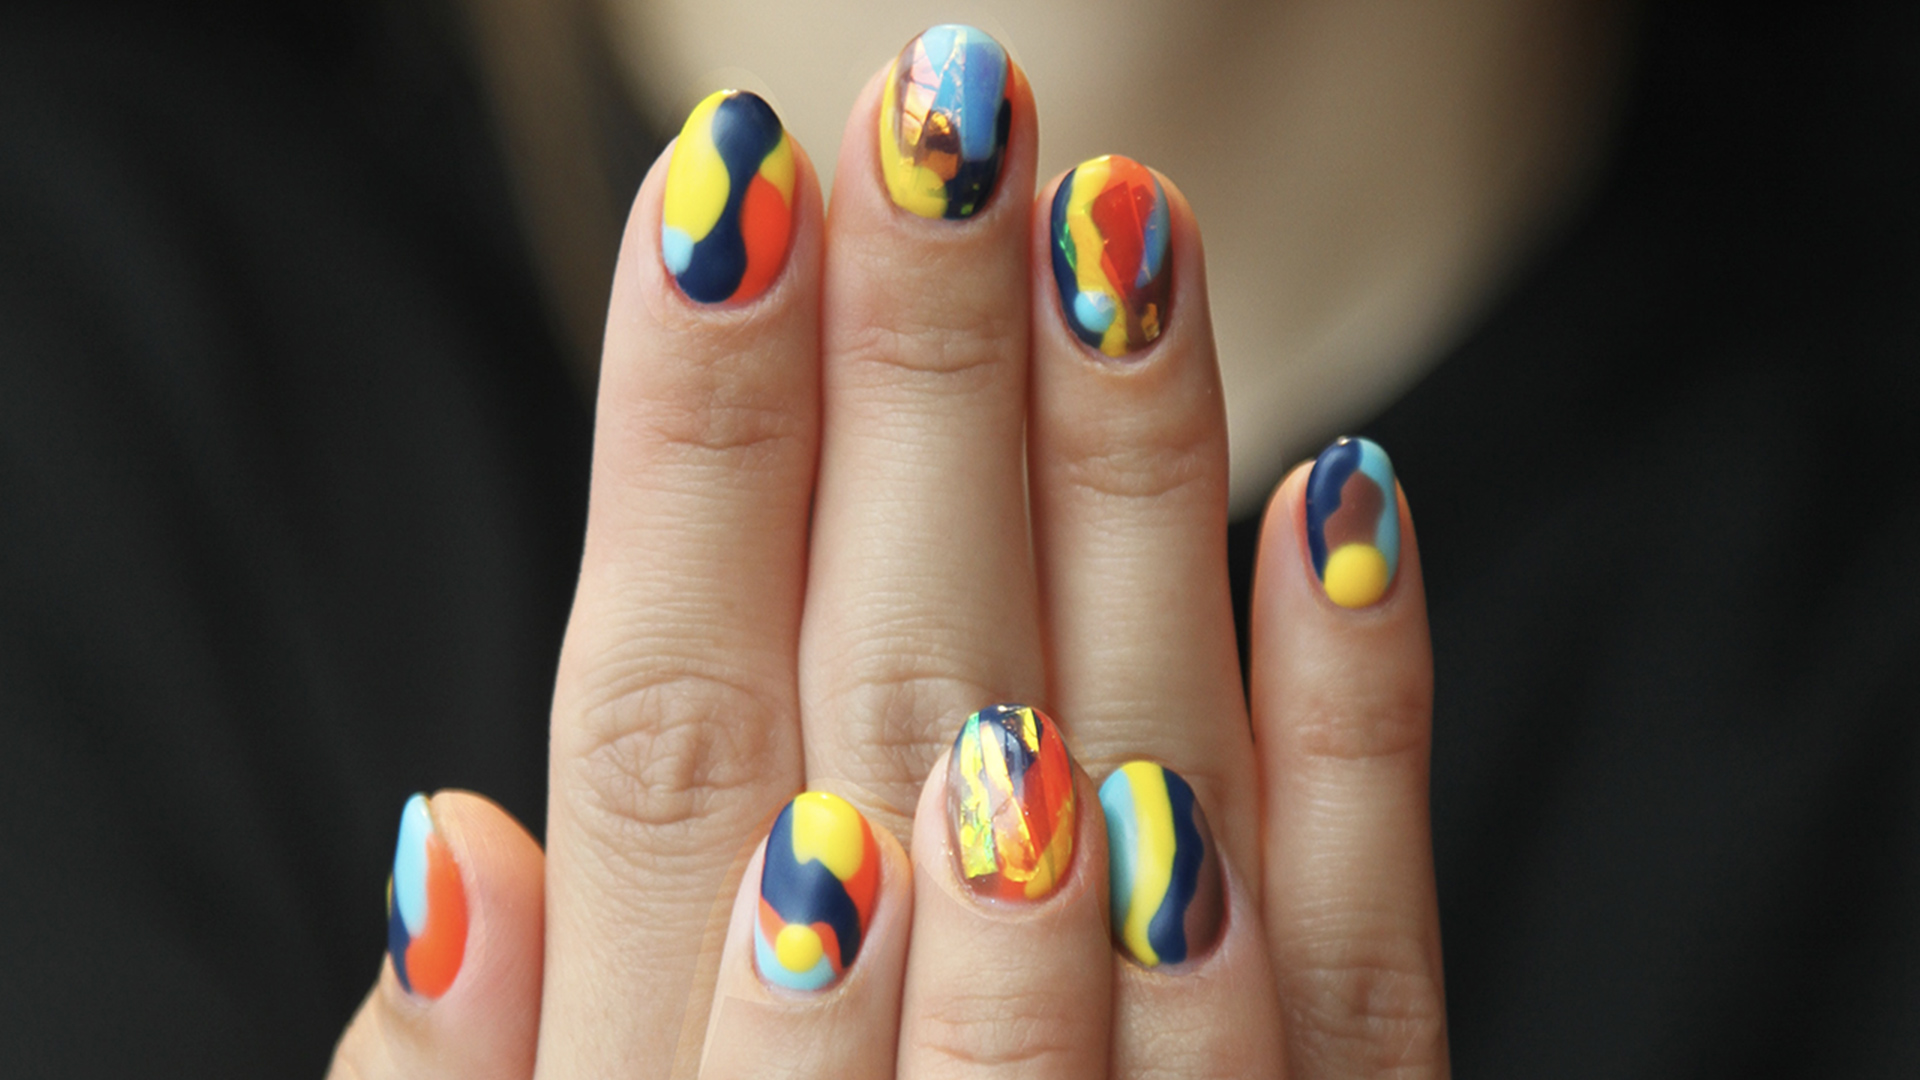 Colourful painted nails